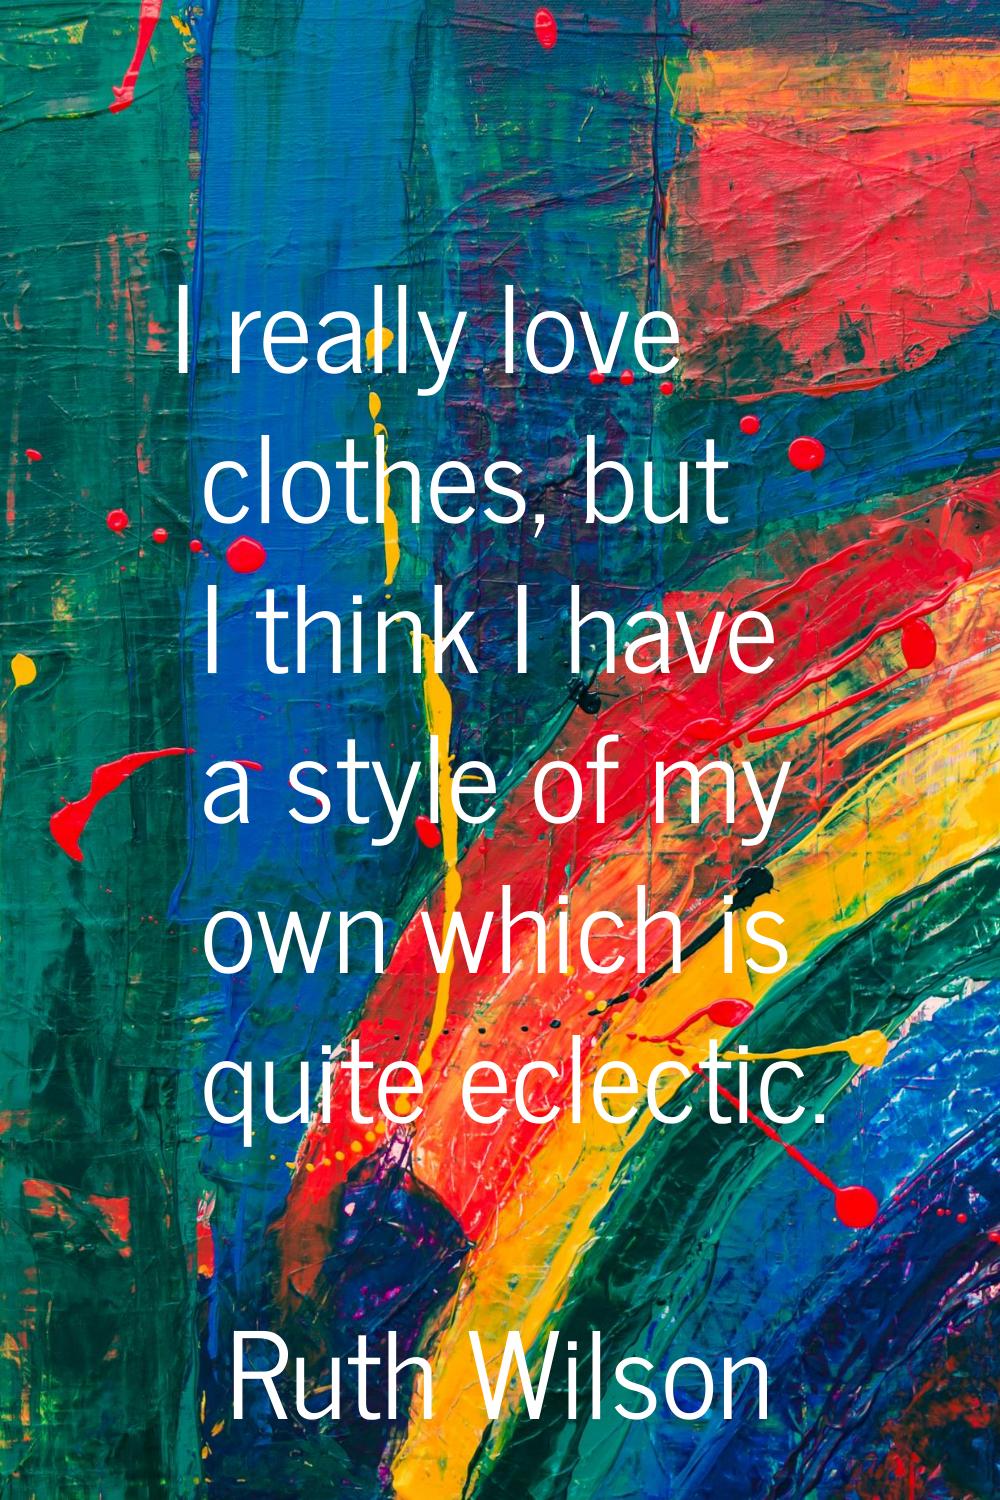 I really love clothes, but I think I have a style of my own which is quite eclectic.